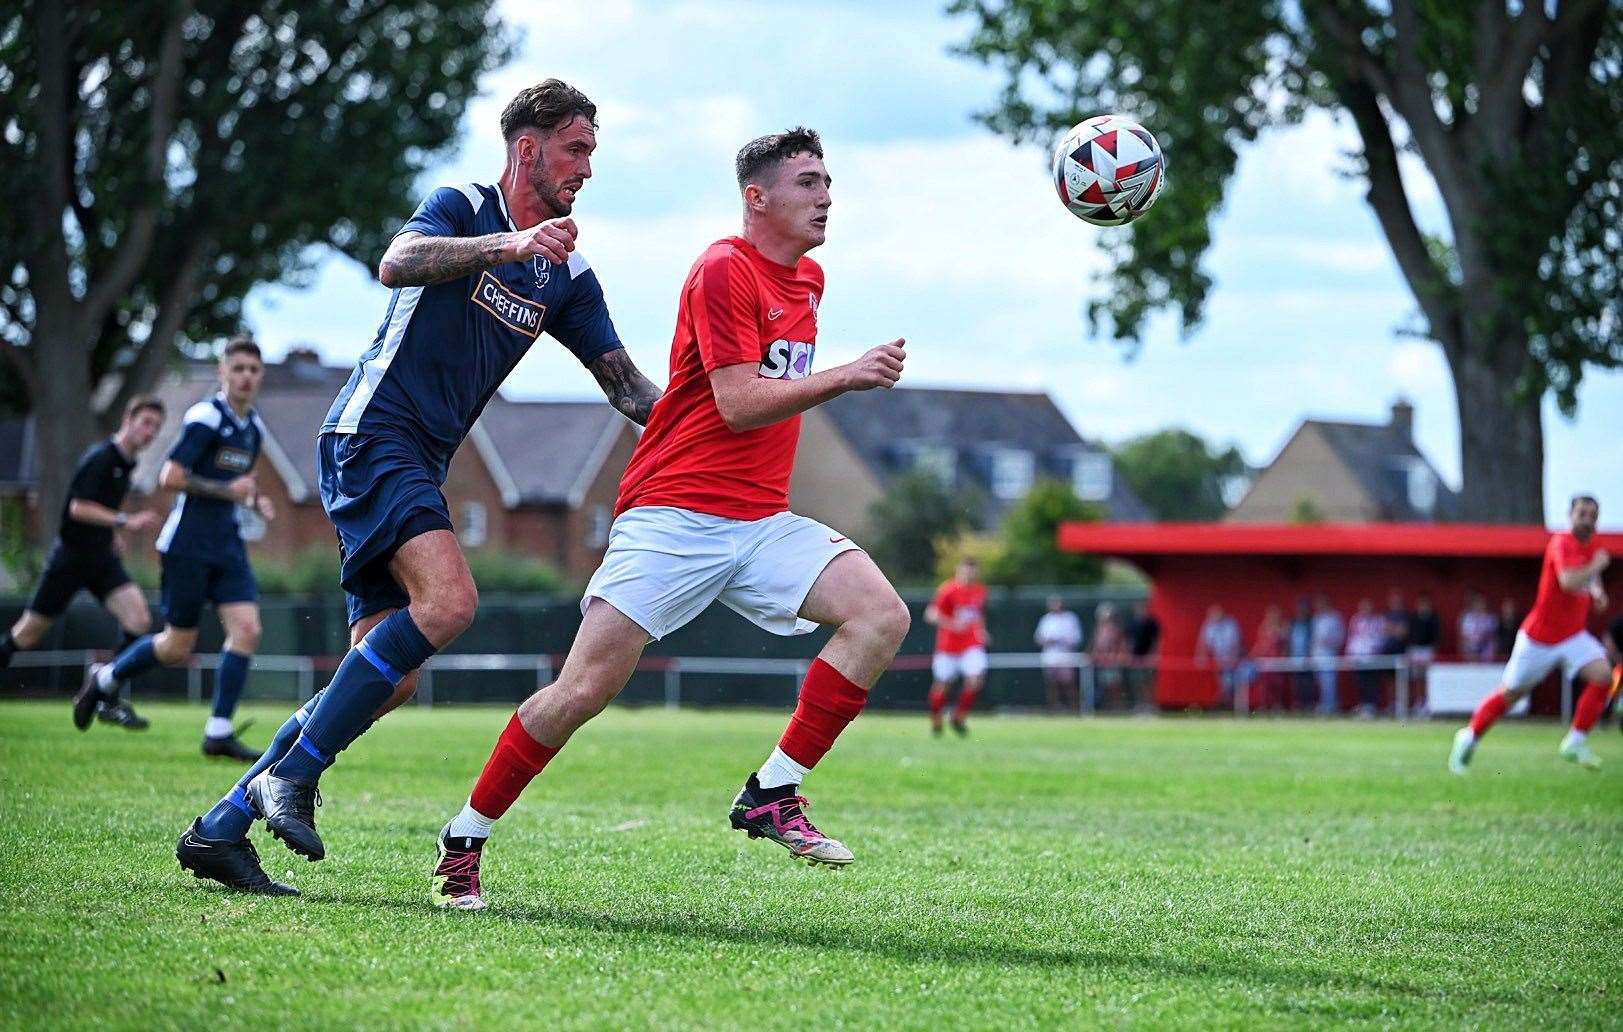 Downham Town v Ely City at the SCL Memorial Field. James Moore chases the ball. Picture: Ian Burt